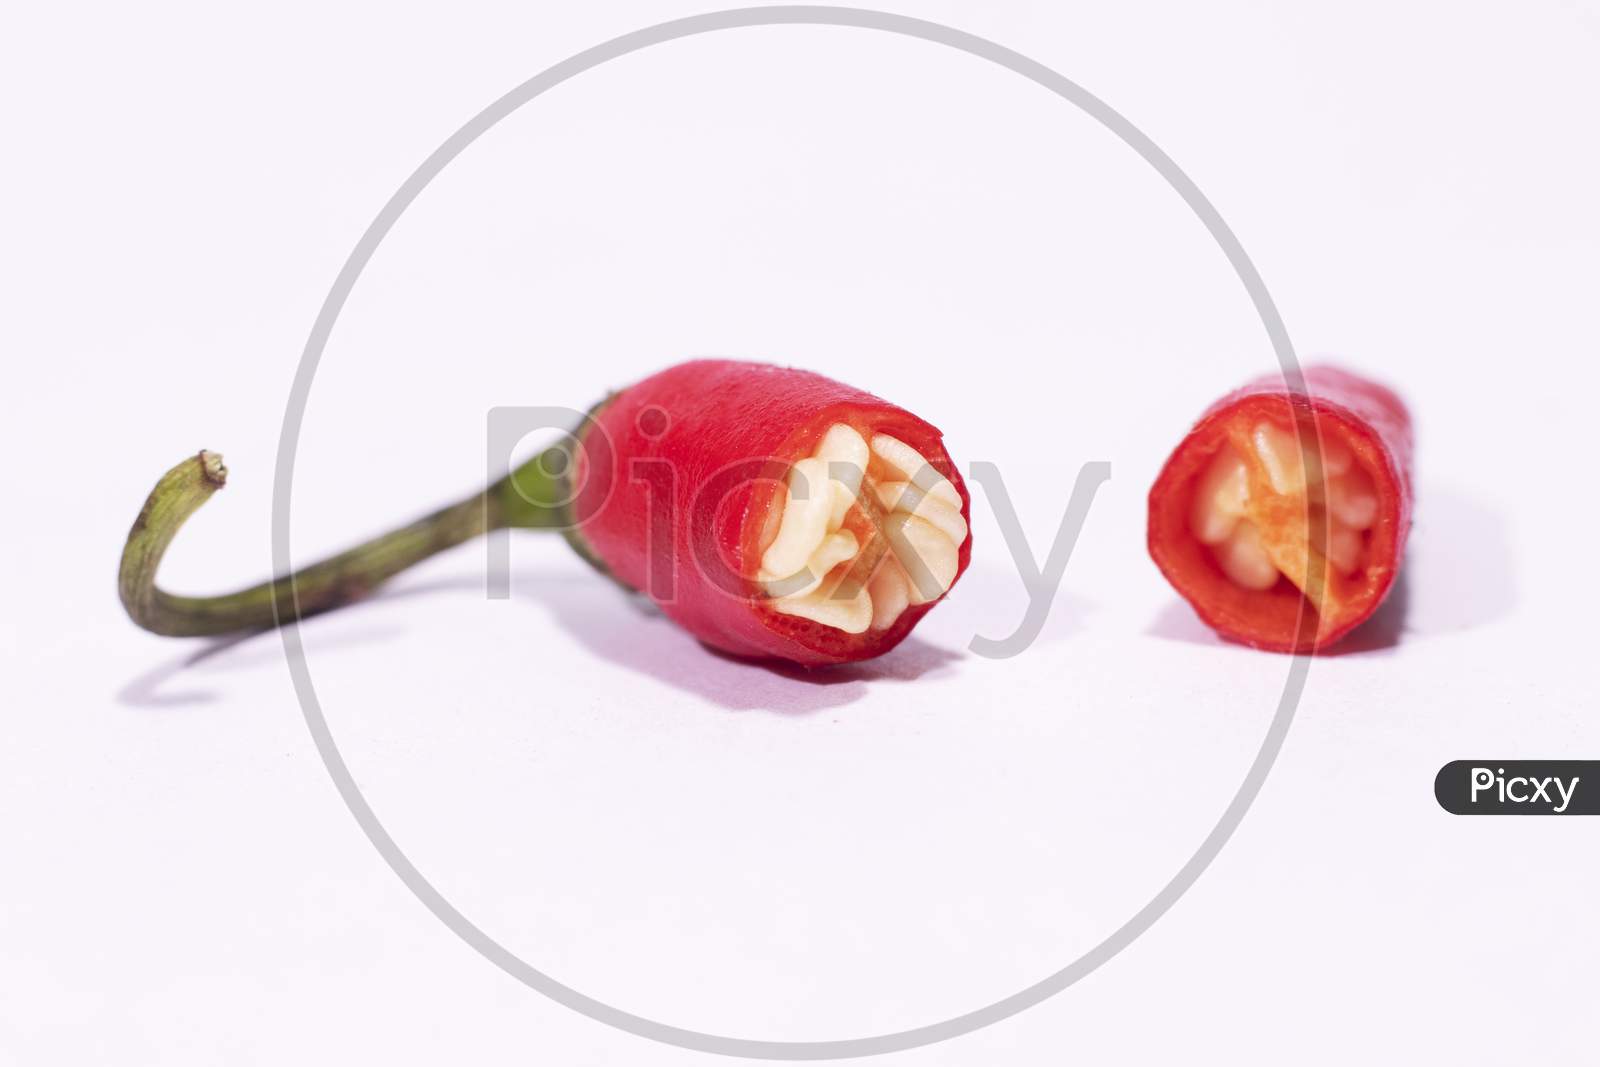 Indian Red Chilli Cutting With White Background